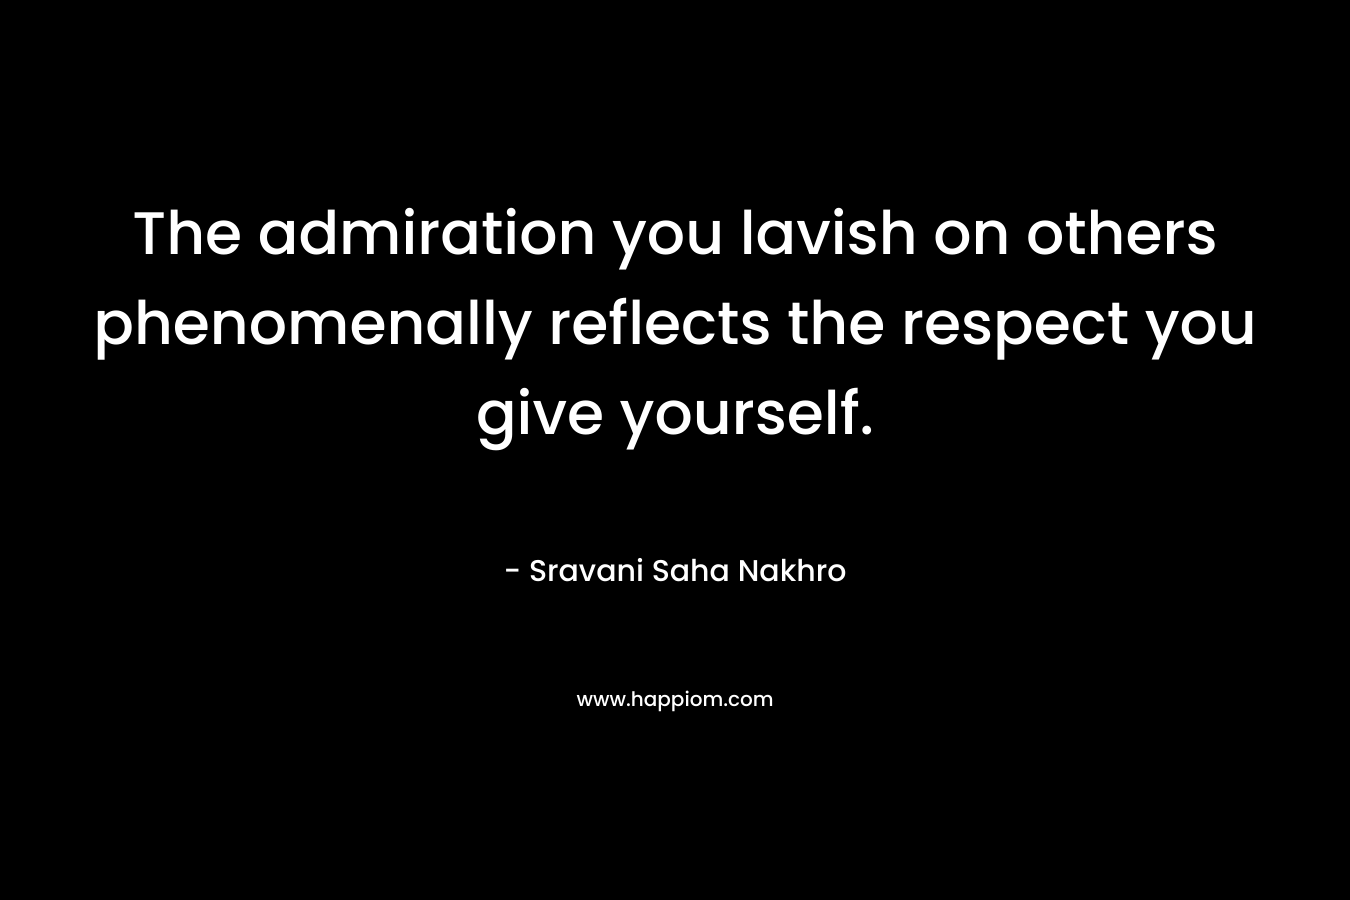 The admiration you lavish on others phenomenally reflects the respect you give yourself.